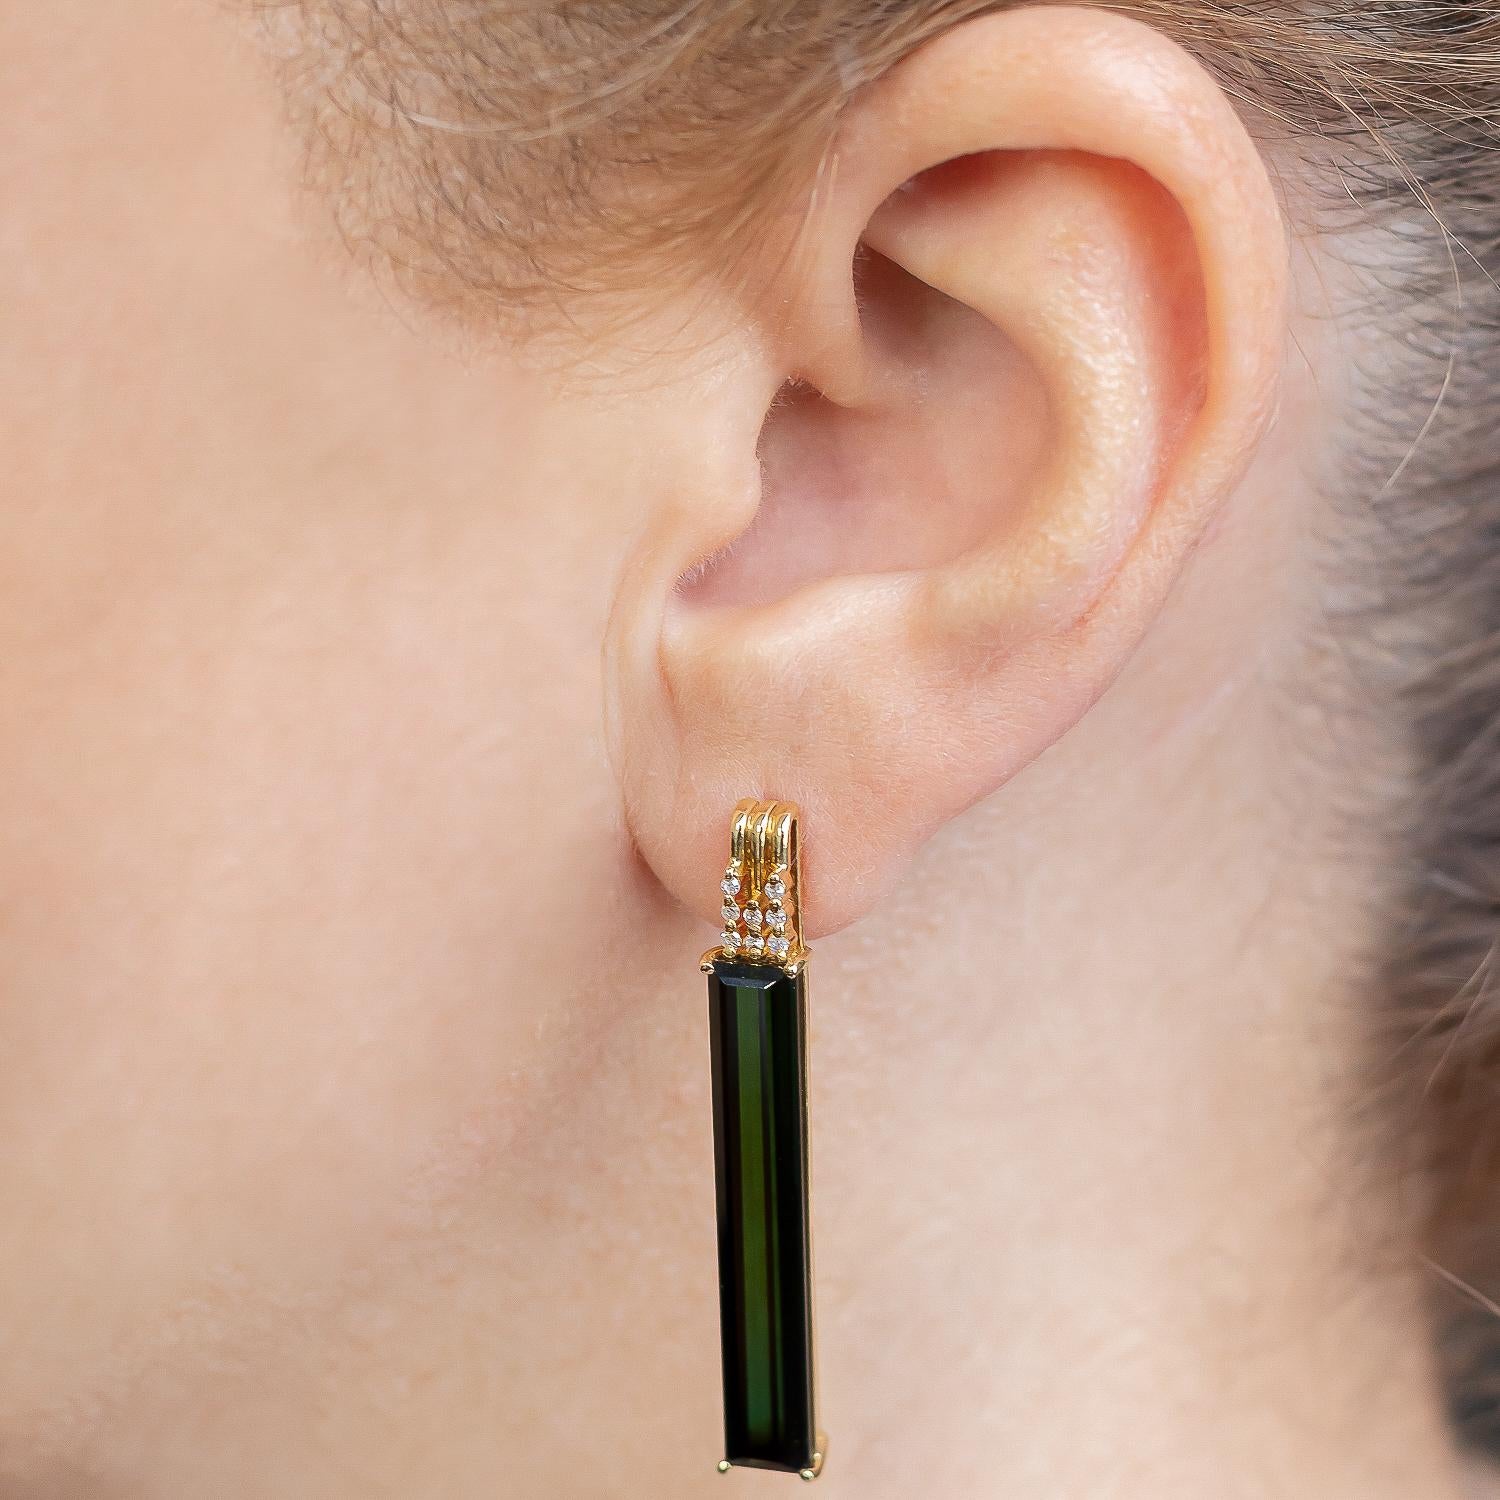 The Turmaline Earrings have been crafted with a beautiful gemstone (17.37cts) and solid 18k yellow gold (6.19grs). We have also used internationally graded VS2 diamonds with a total weight of 0.11cts.

It is a unique and versatile piece that can